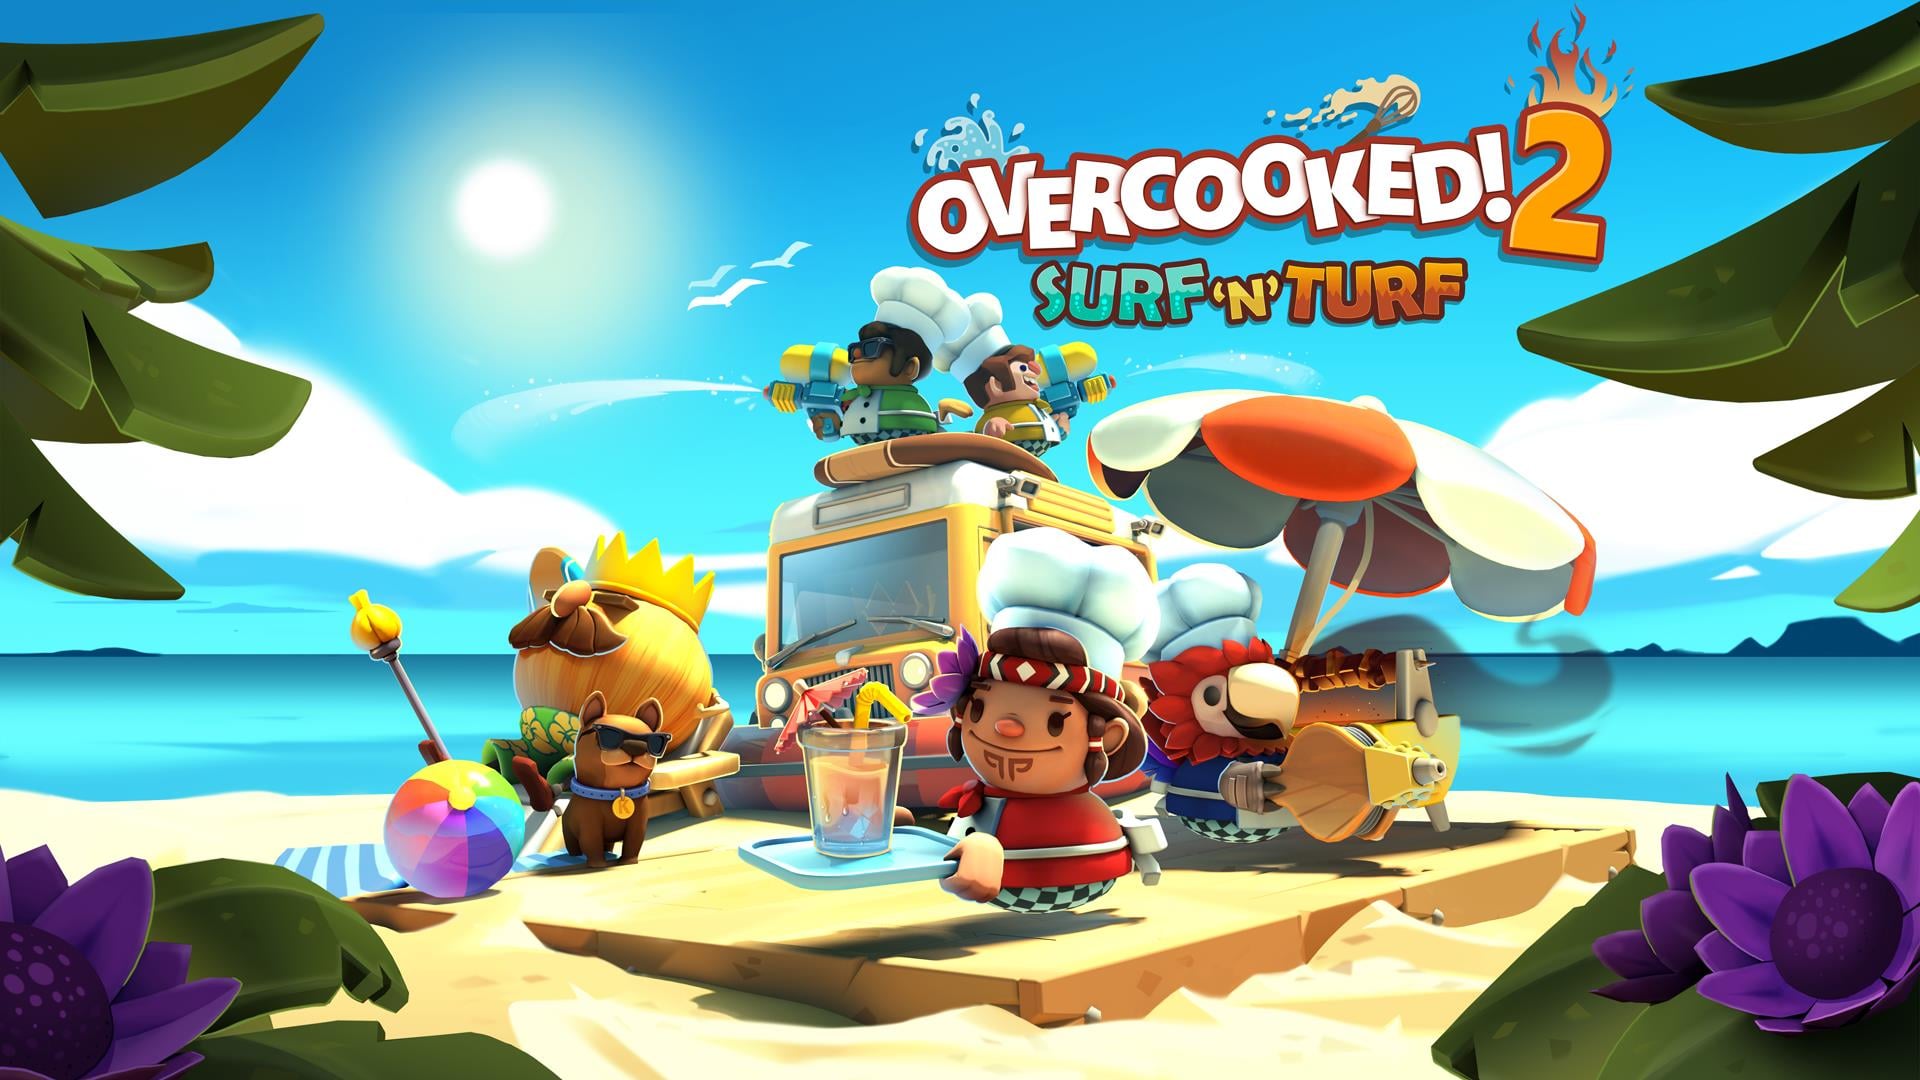 Overcooked! 2 - Surf 